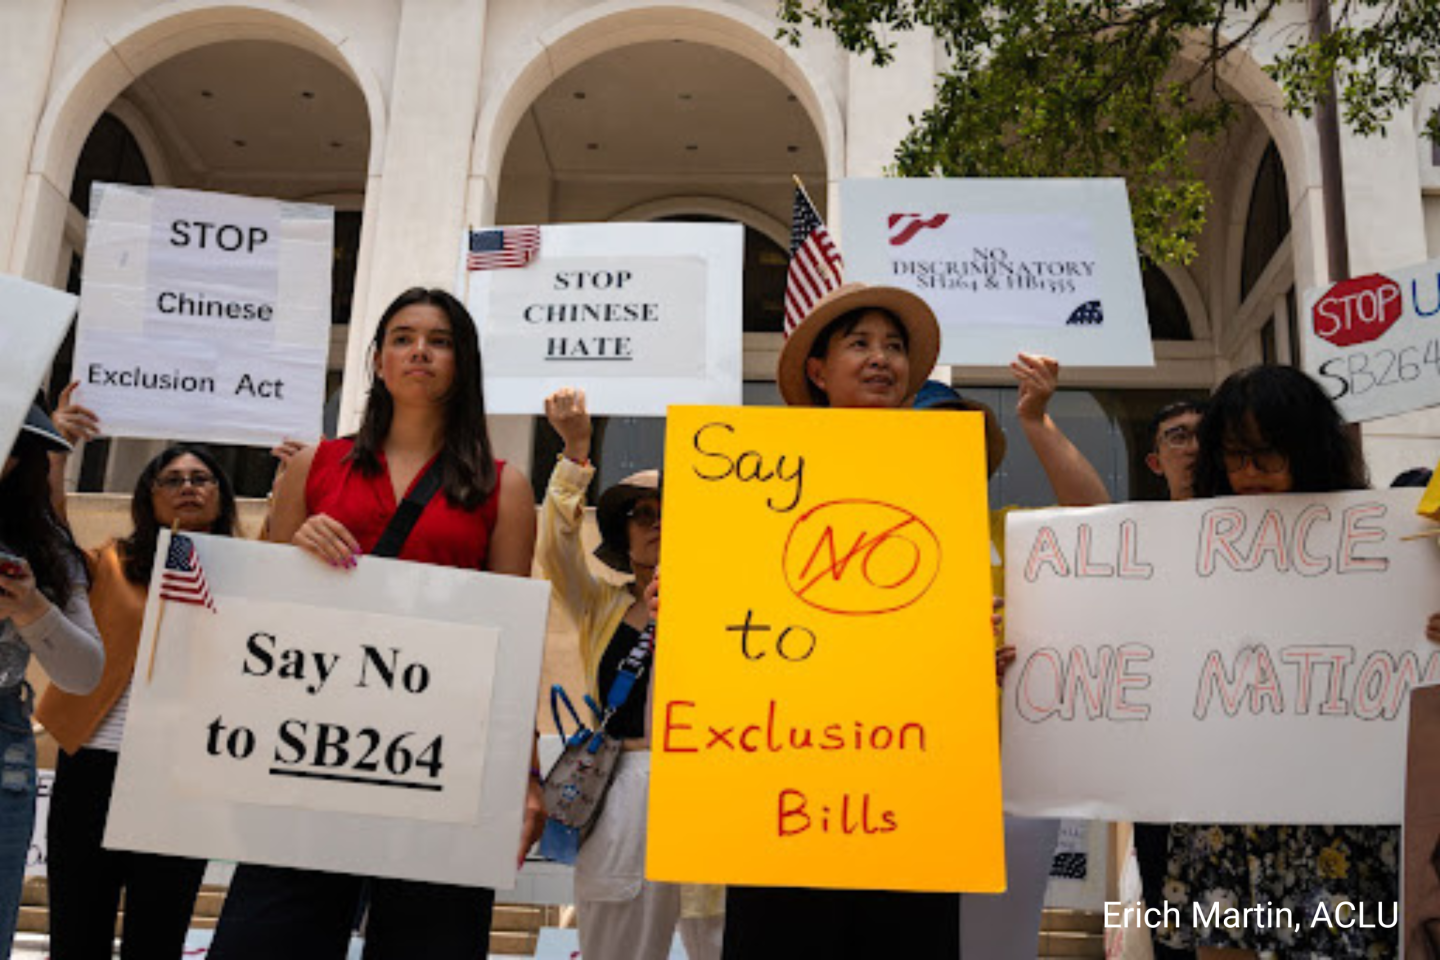 Protestors gather in front of the courthouse in Tallahassee, Florida, where attorneys for ACLU and AALDEF argued against the implementation of SB 264. Photo Credit to Erich Martin, ACLU.